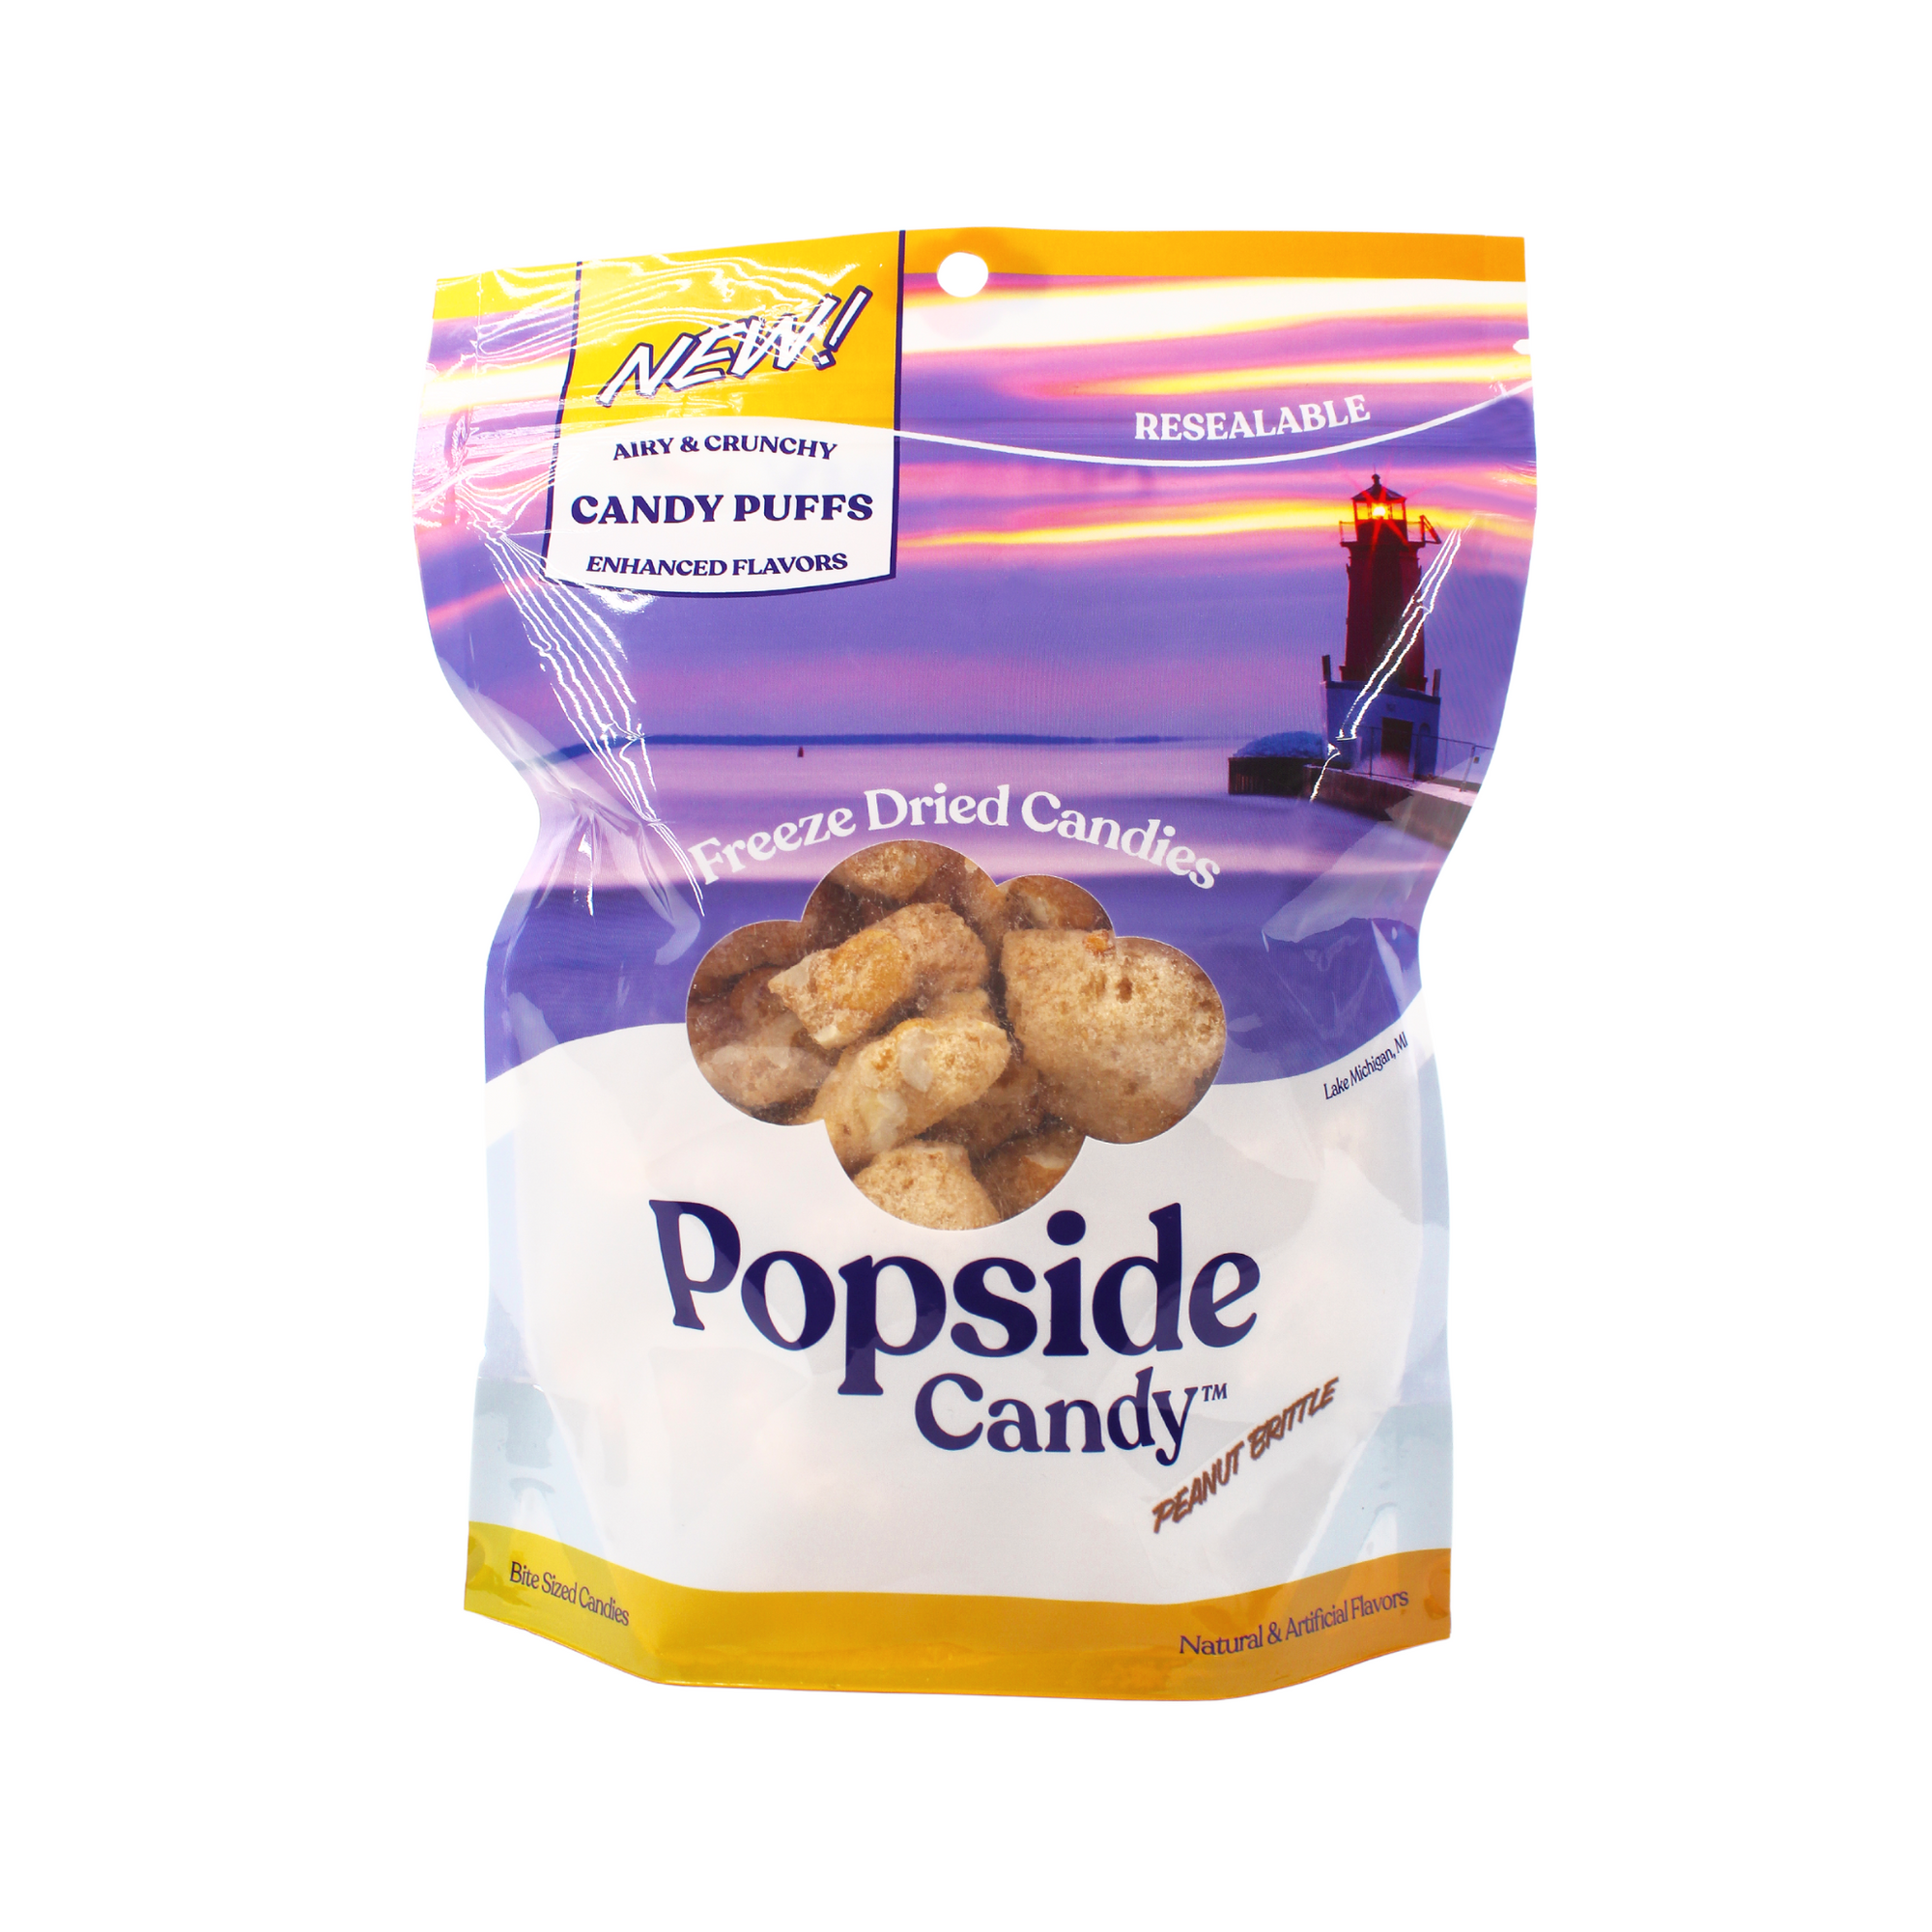 Popside Candy: Peanut Brittle